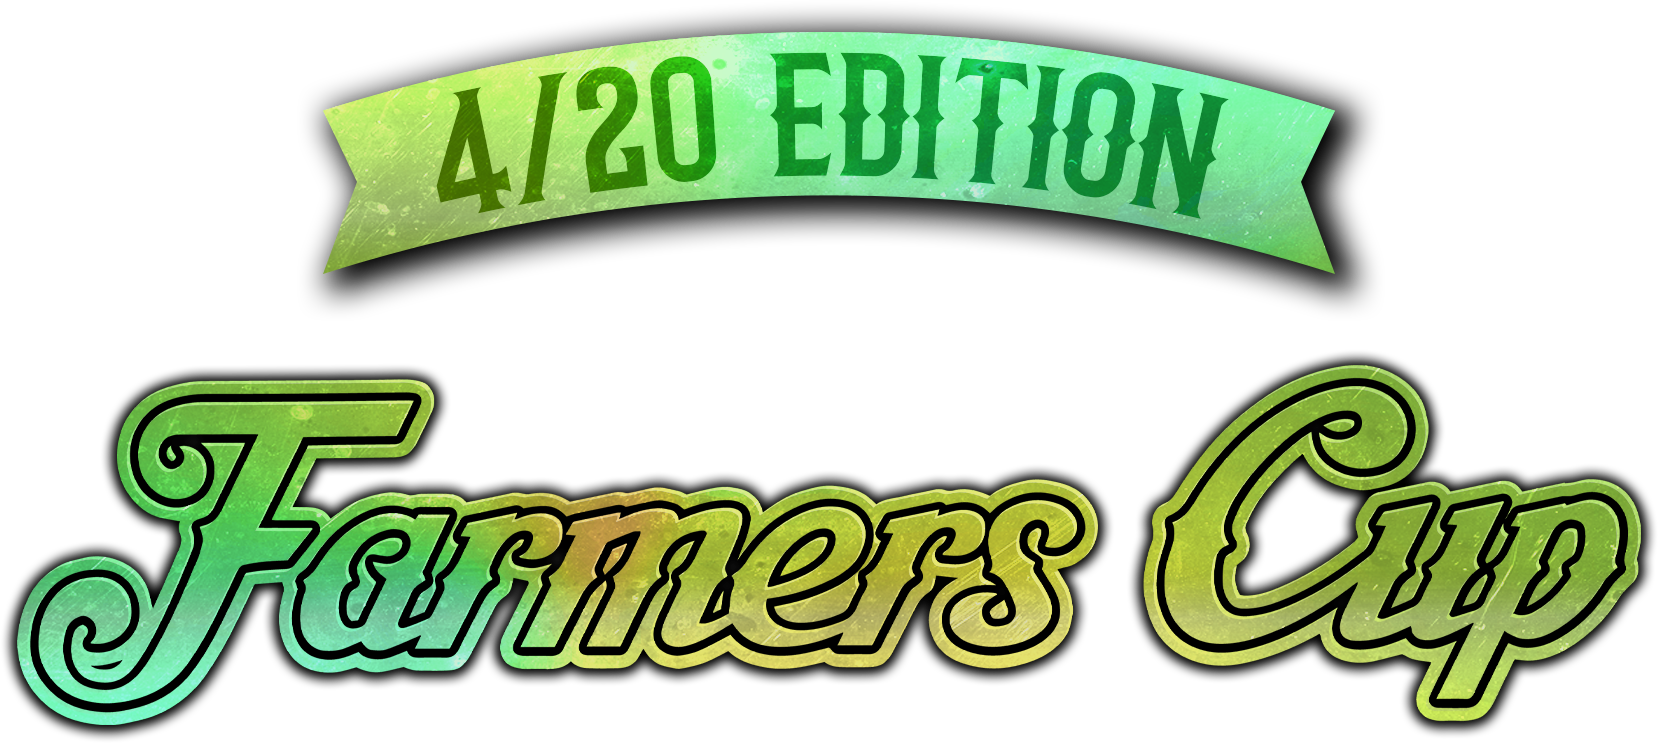 Farmers Cup - 420 Edition (Cannabis Competition in San Diego, CA)